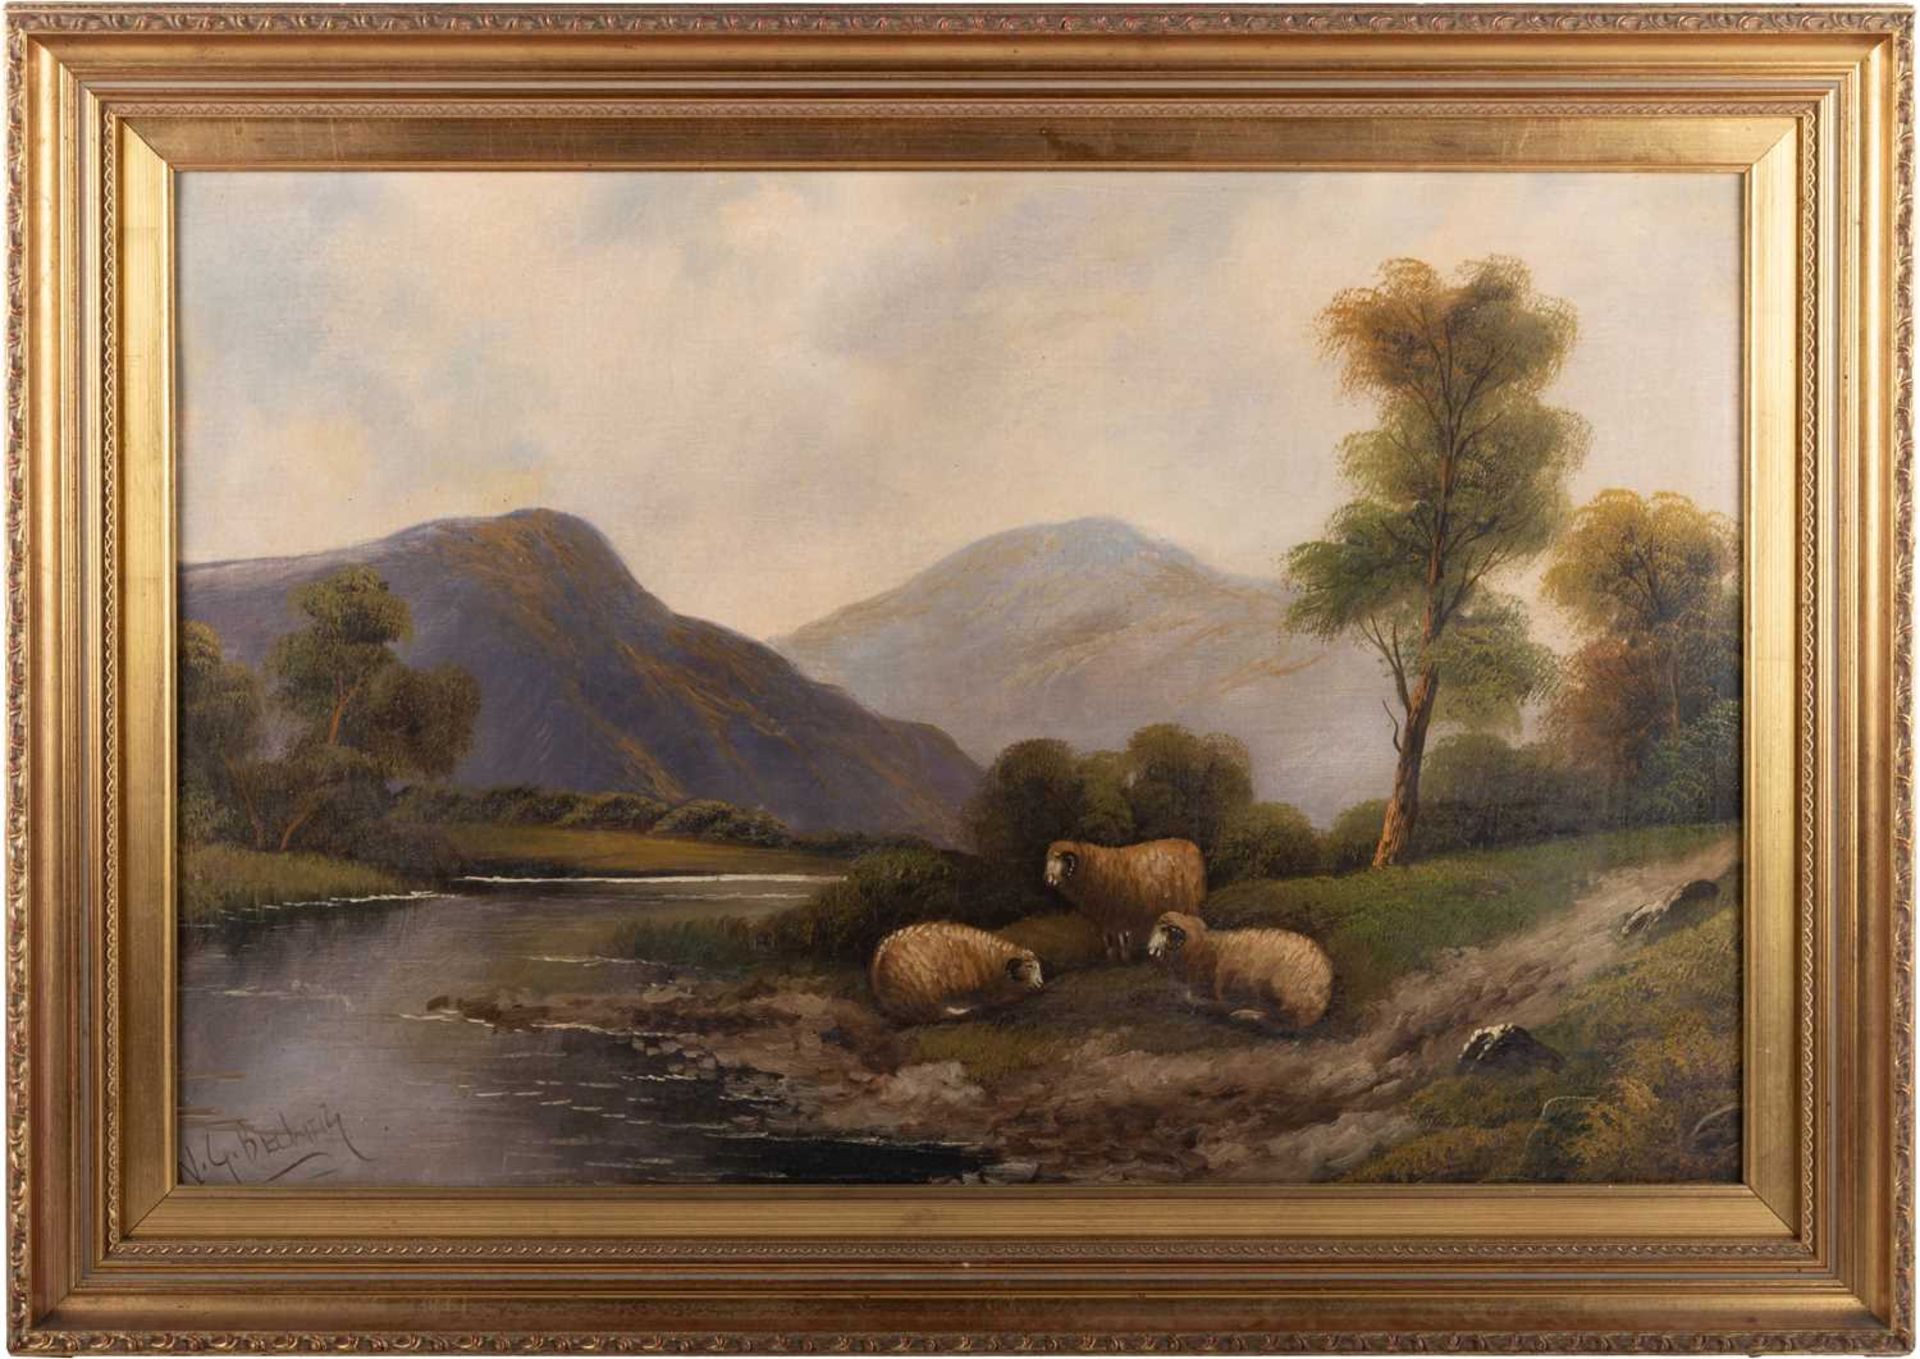 EARLY 20TH CENTURY ENGLISH SCHOOL SHEEP IN A LANDSCAPE